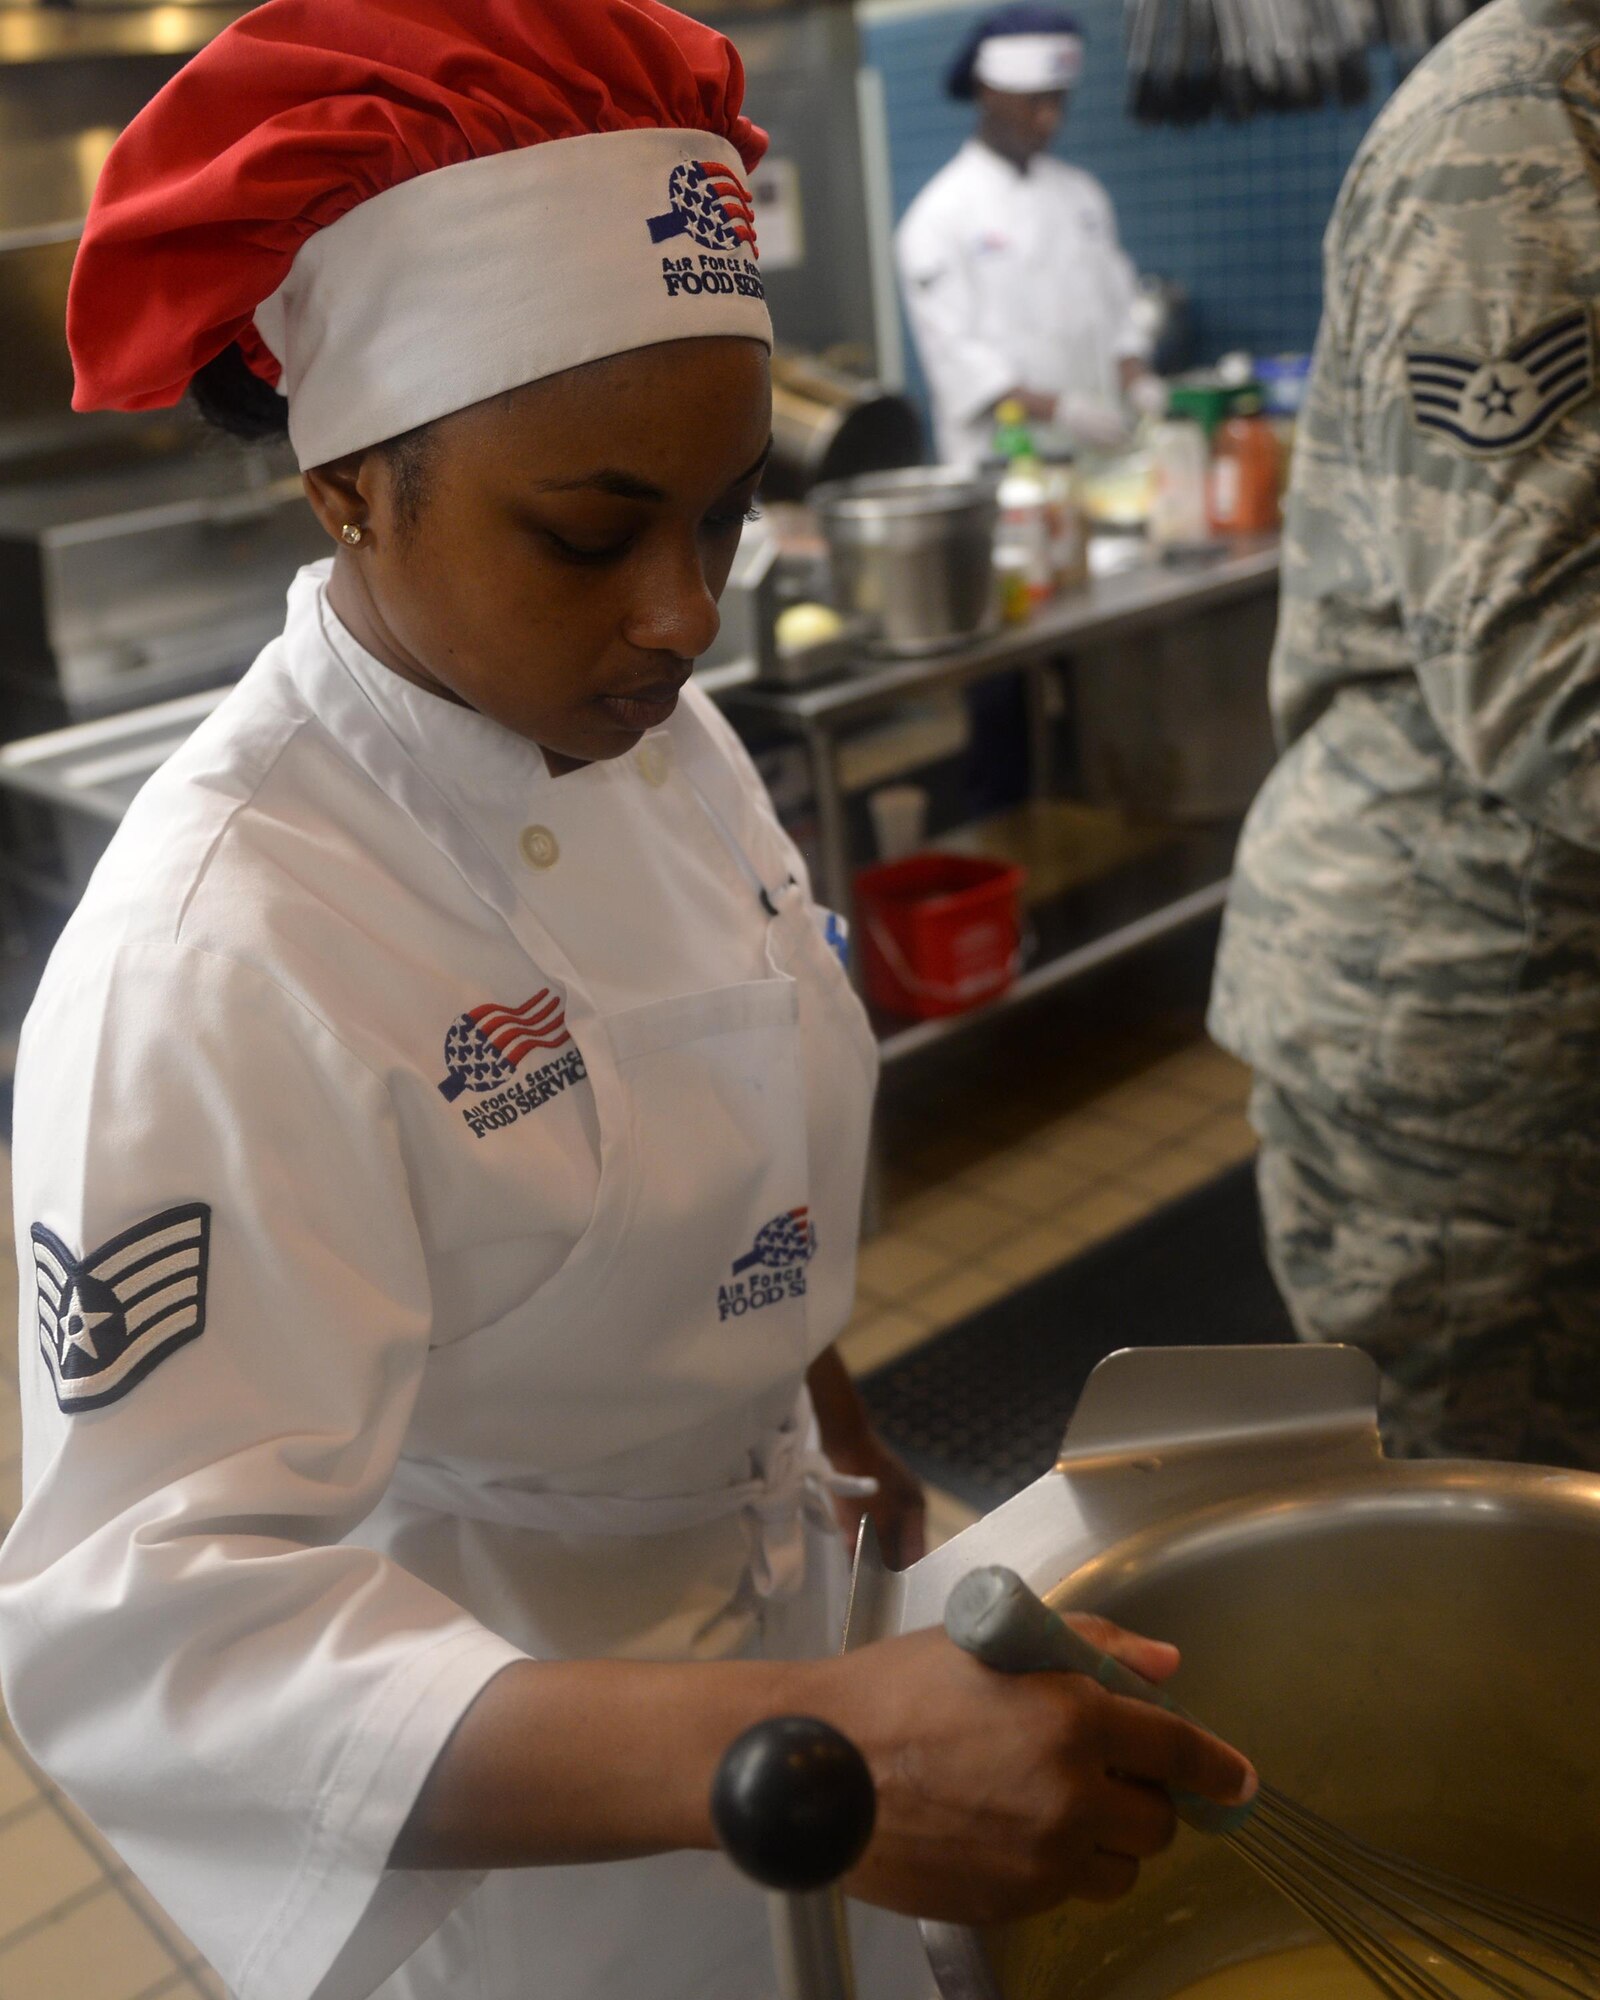 Staff Sgt. Jacquelyne Ford, 325th Force Support Squadron Berg-Liles Dining Facility (DFAC) shift leader, stirs a pot of broth being prepared for the dinner crowd at Tyndall Air Force Base, May 17. The DFAC provides hot, nutritious food service to more than 62,000 personnel annually in support of the Tyndall mission to train and project unrivaled combat air power. (U.S. Air Force photo by Airman 1st Class Cody R. Miller/Released)